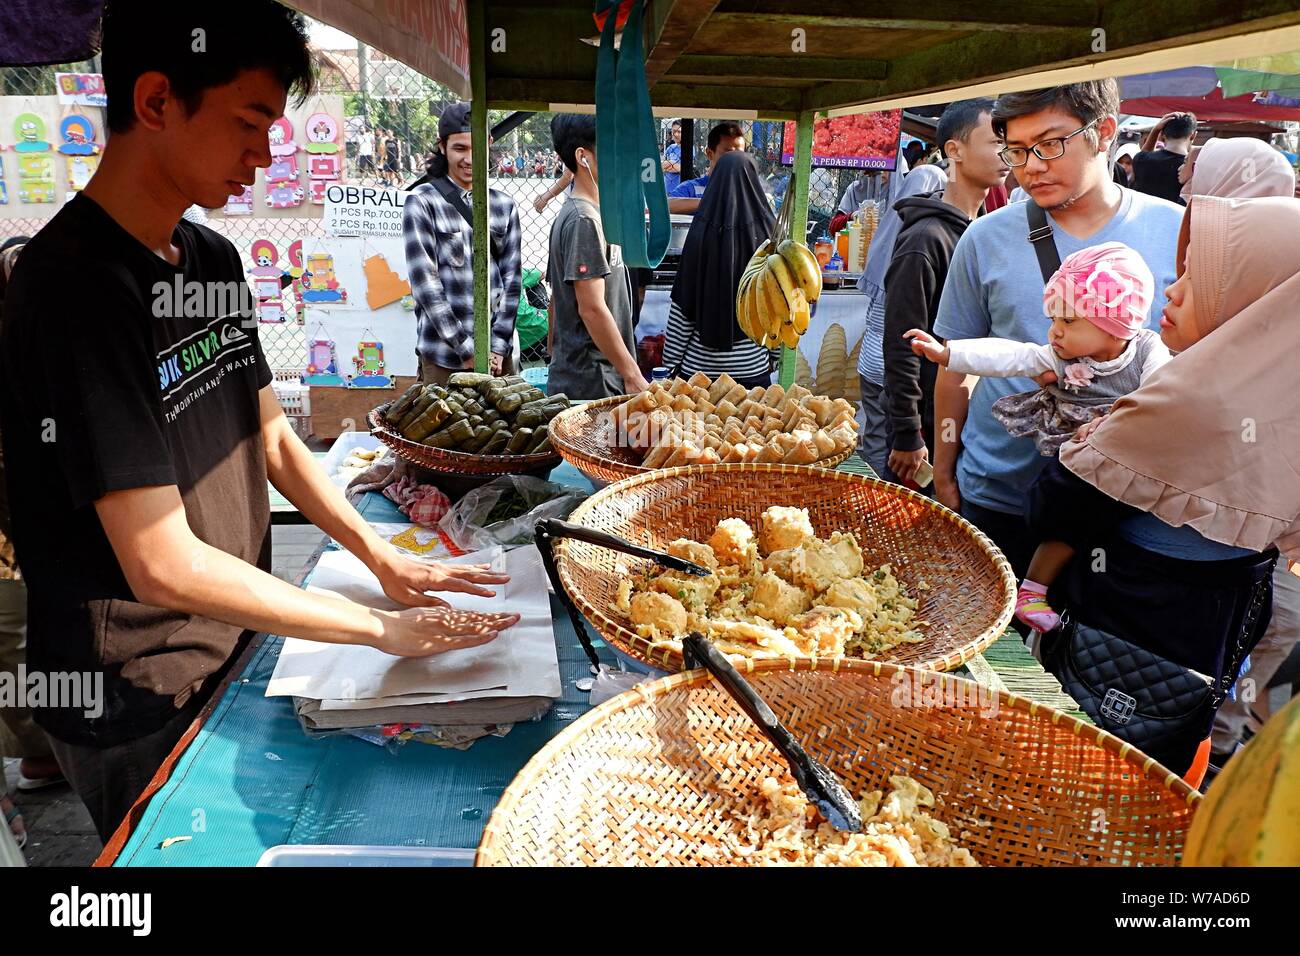 A view of seller and buyer in a street food booth. Stock Photo